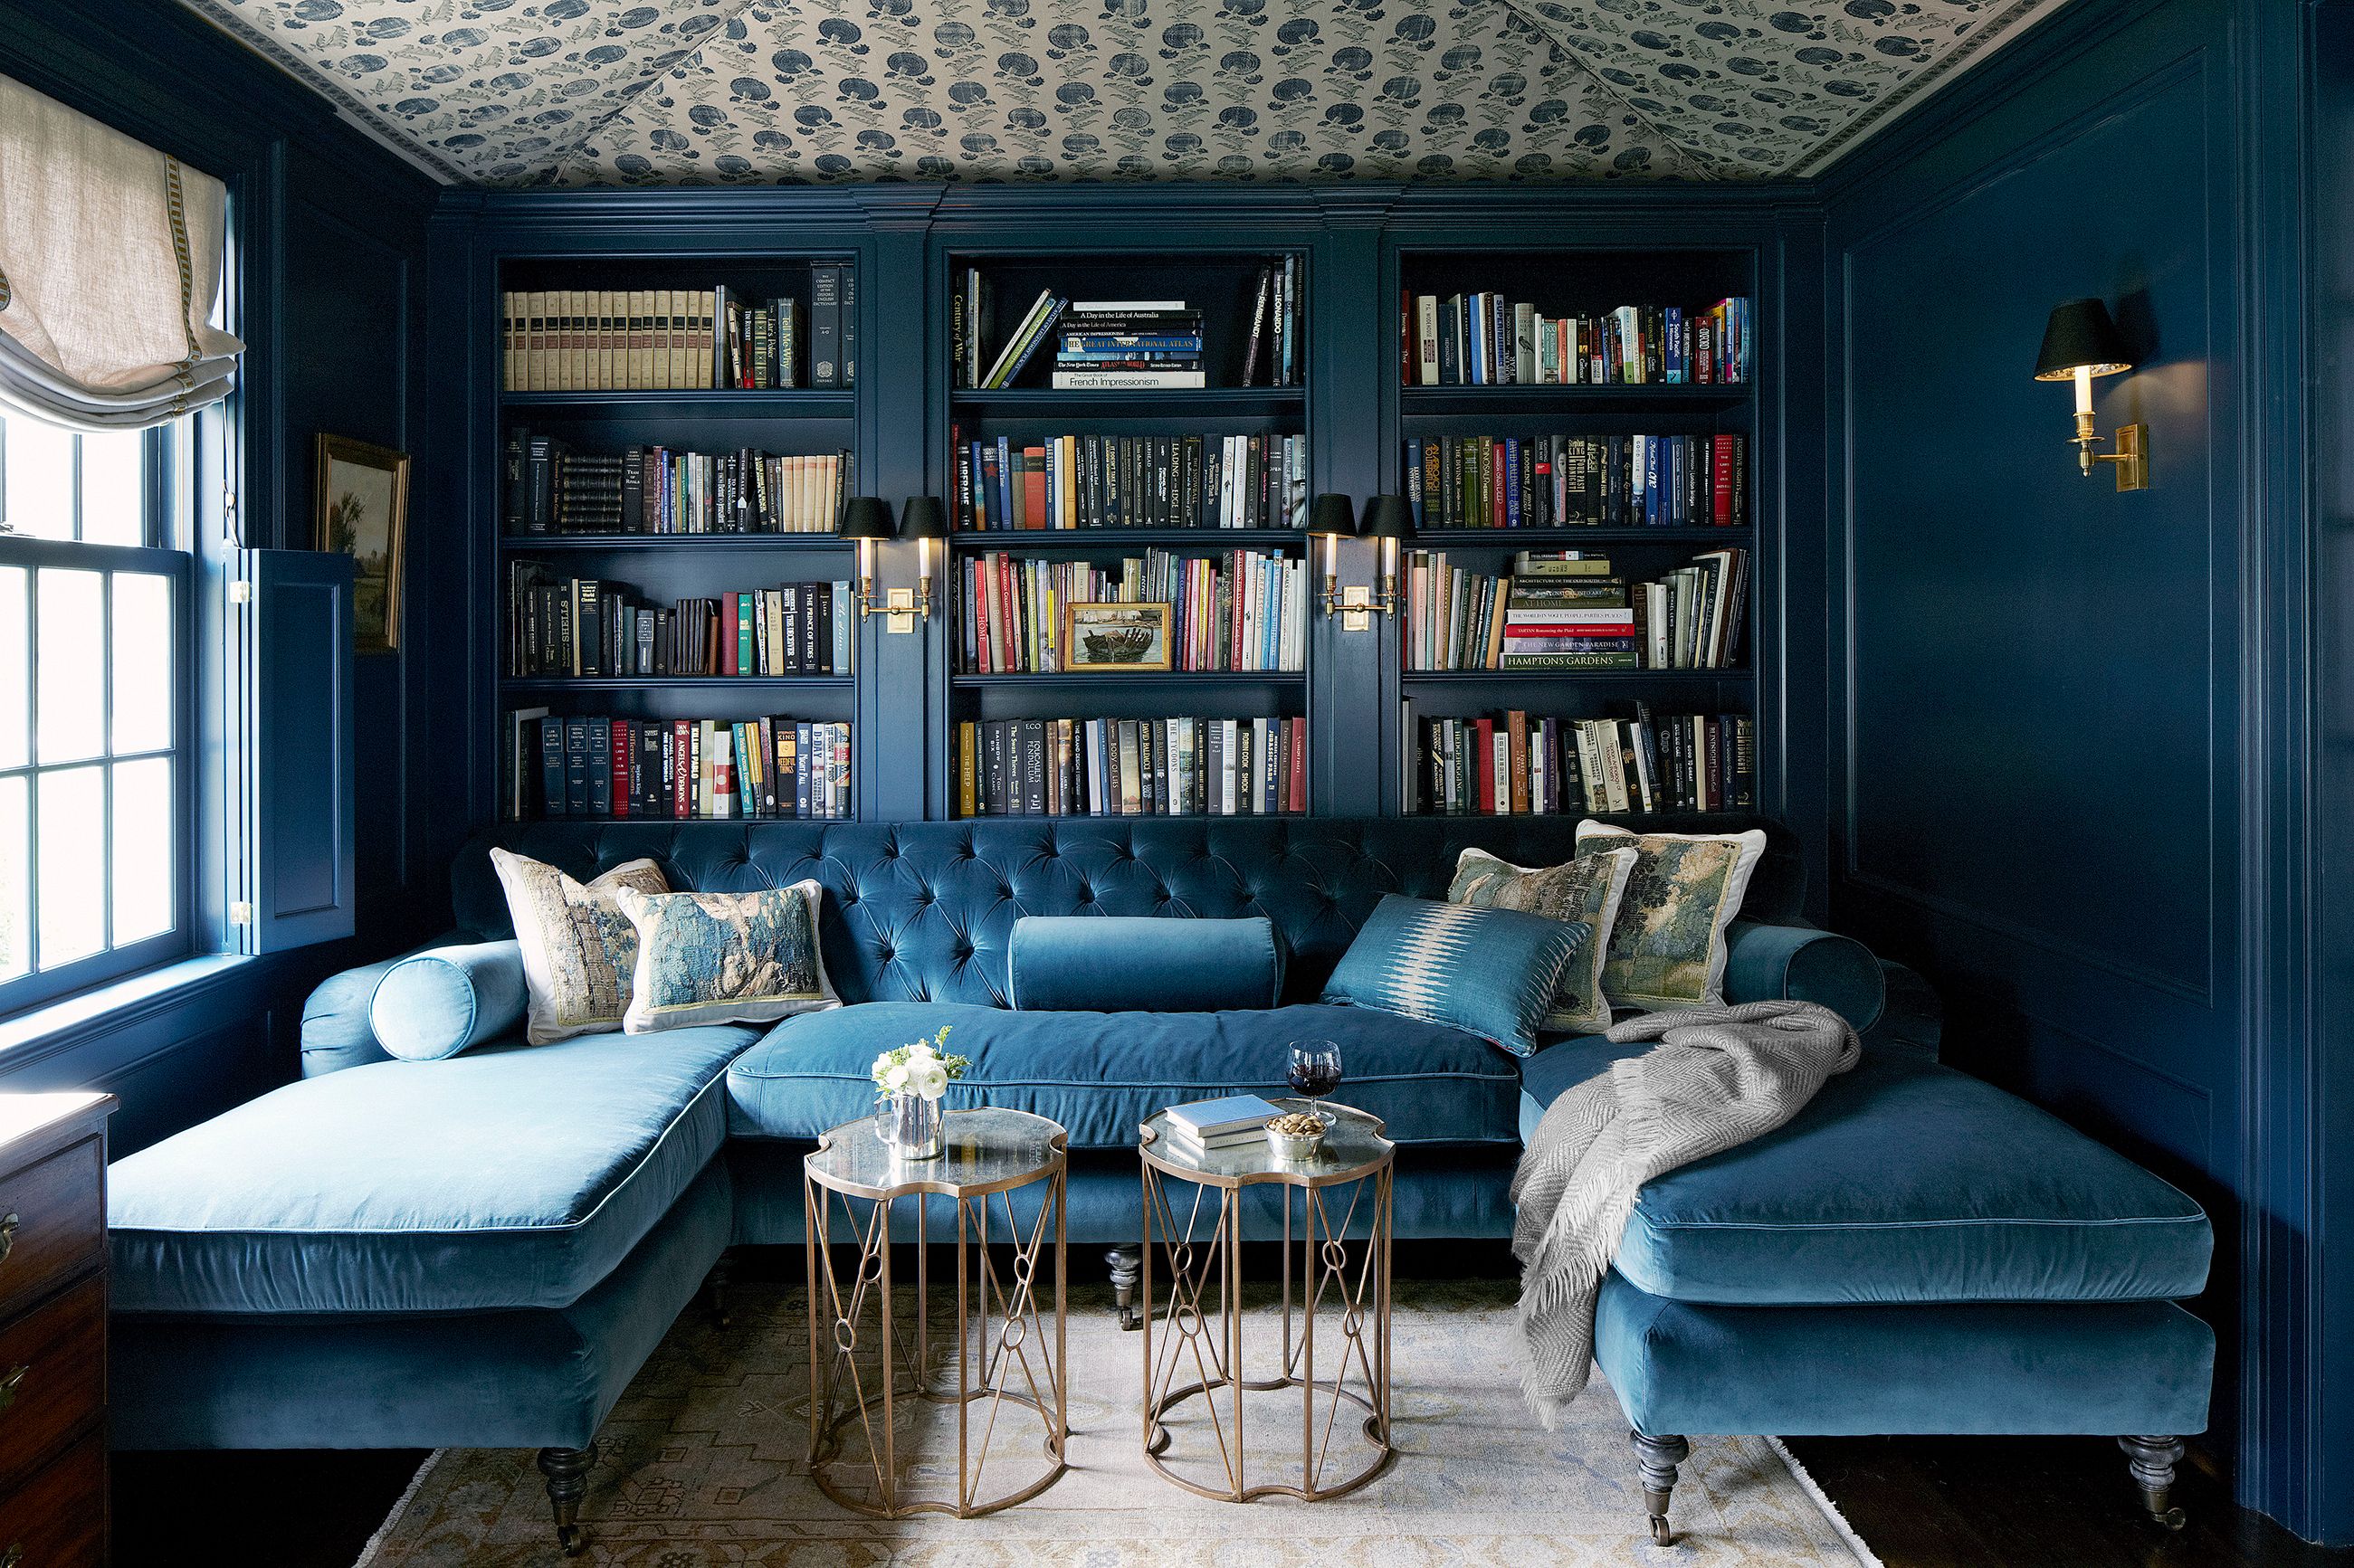 Feeling Blue? Up Your Interior Game with Indigo, Wit & Delight